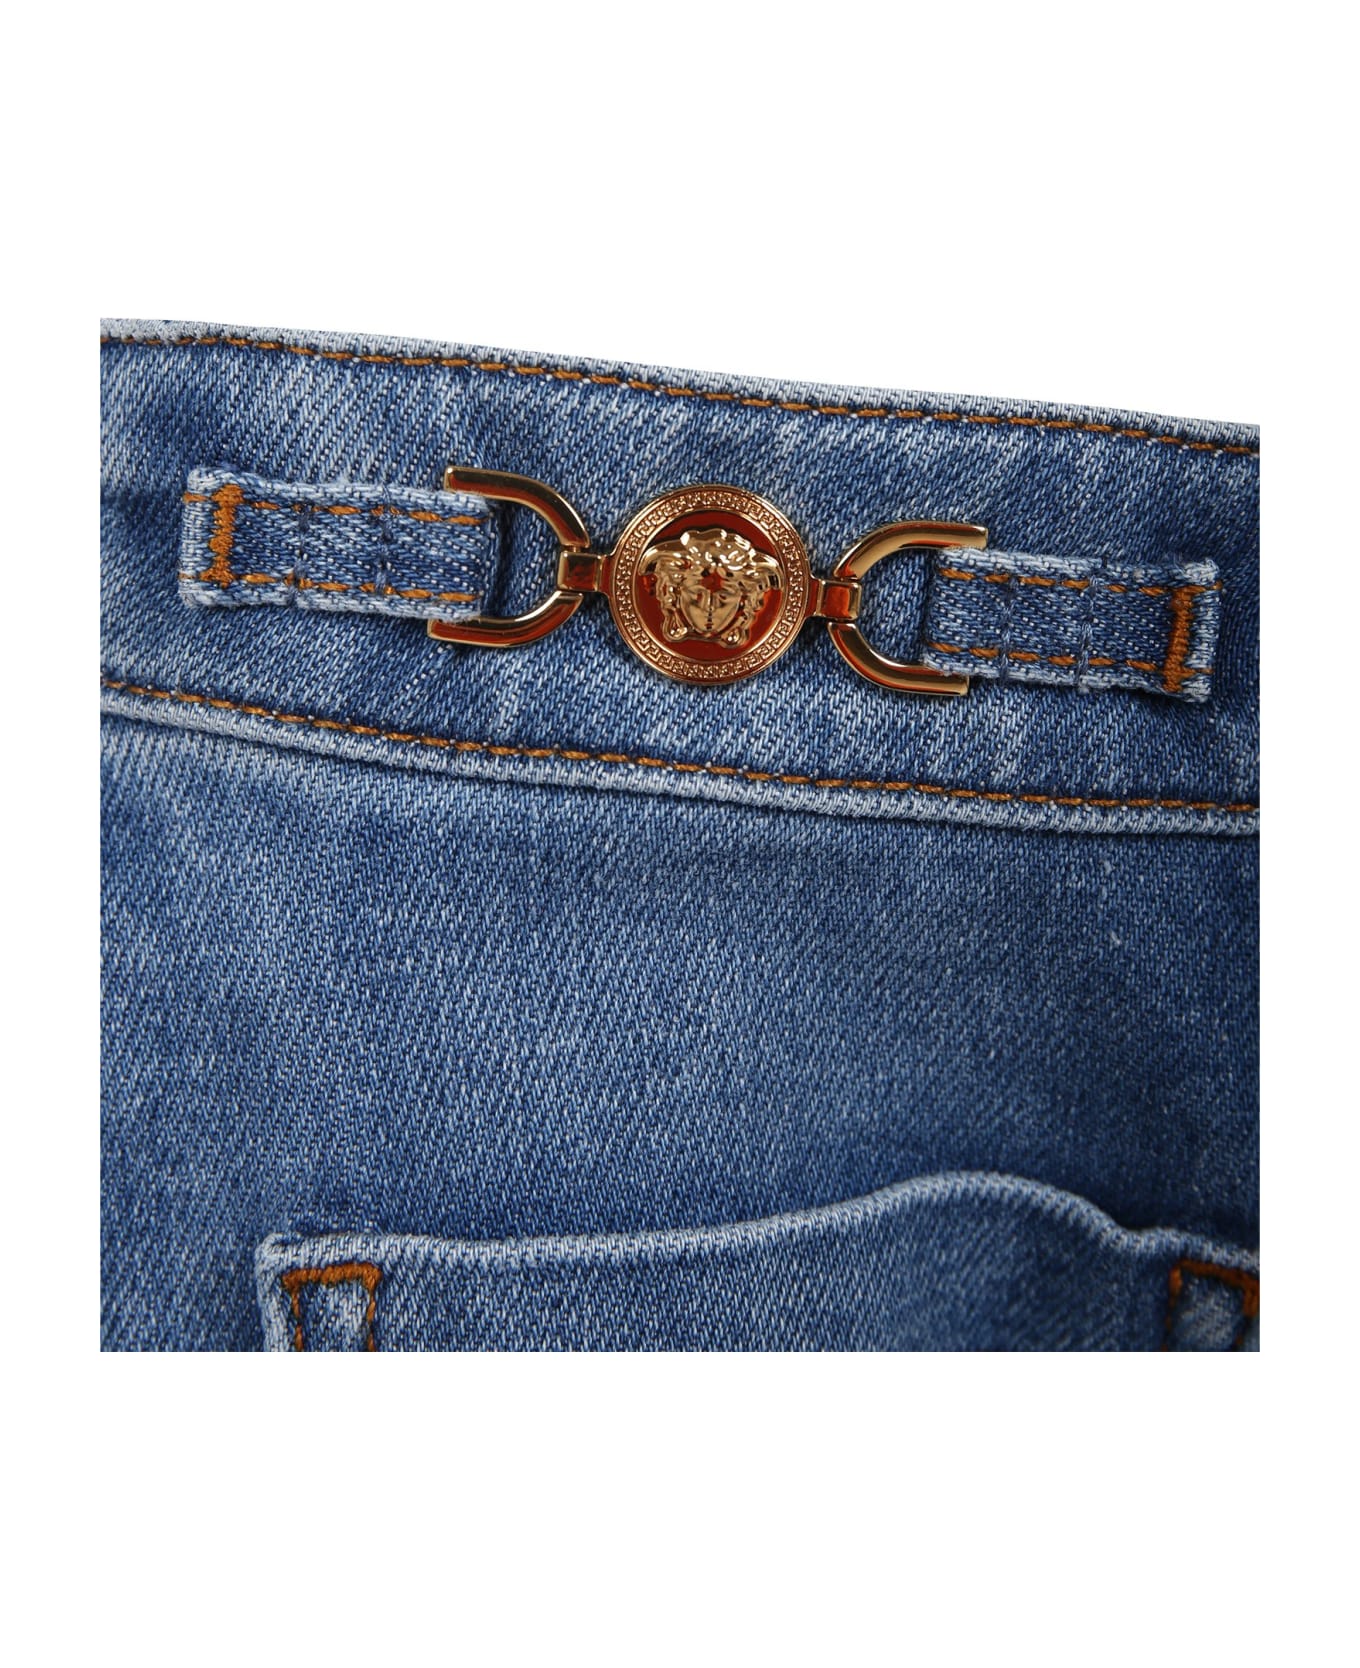 Versace Jeans For Girl With Golden Inserts - Denim